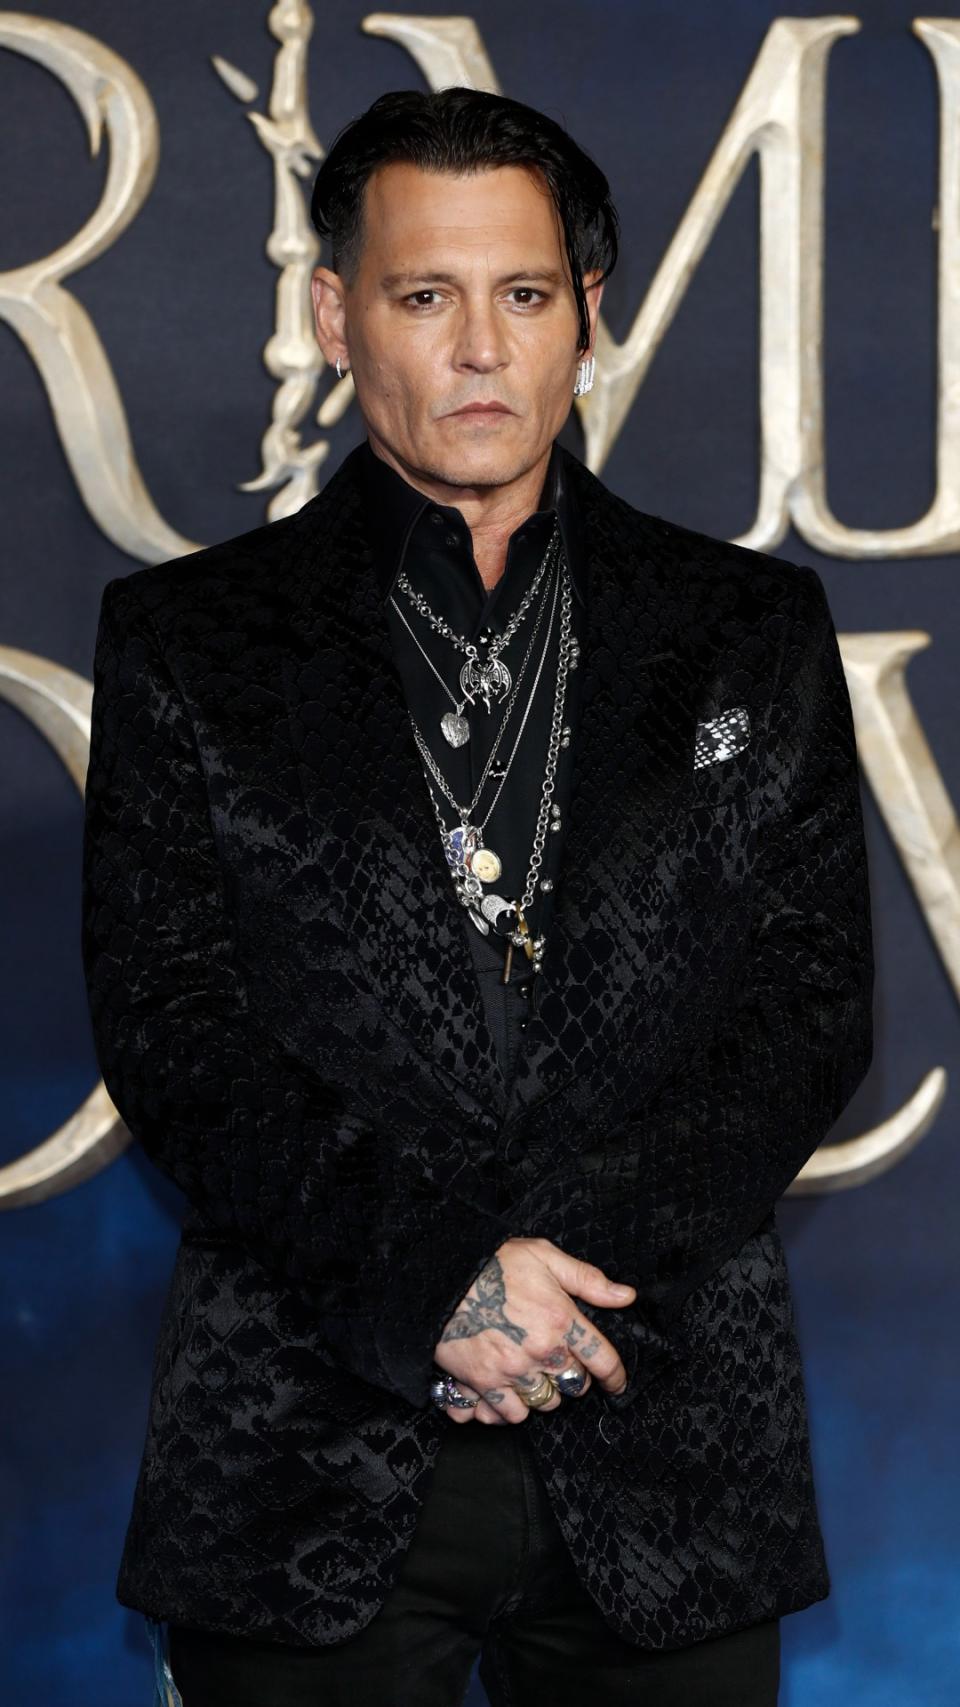 <p> Johnny Depp's films have grossed over $8 billion worldwide, making him one of Hollywood's biggest box office draws.  </p> <p> Despite star turns in Edward Scissorhands, Ed Wood and the Pirates of the Caribbean films, Johnny has yet to take home an Oscar.  </p> <p> He has been nominated three times for Best Actor - for the first Pirates of the Caribbean in 2004, for Finding Neverland in 2005 and for Sweeney Todd in 2008.  </p>